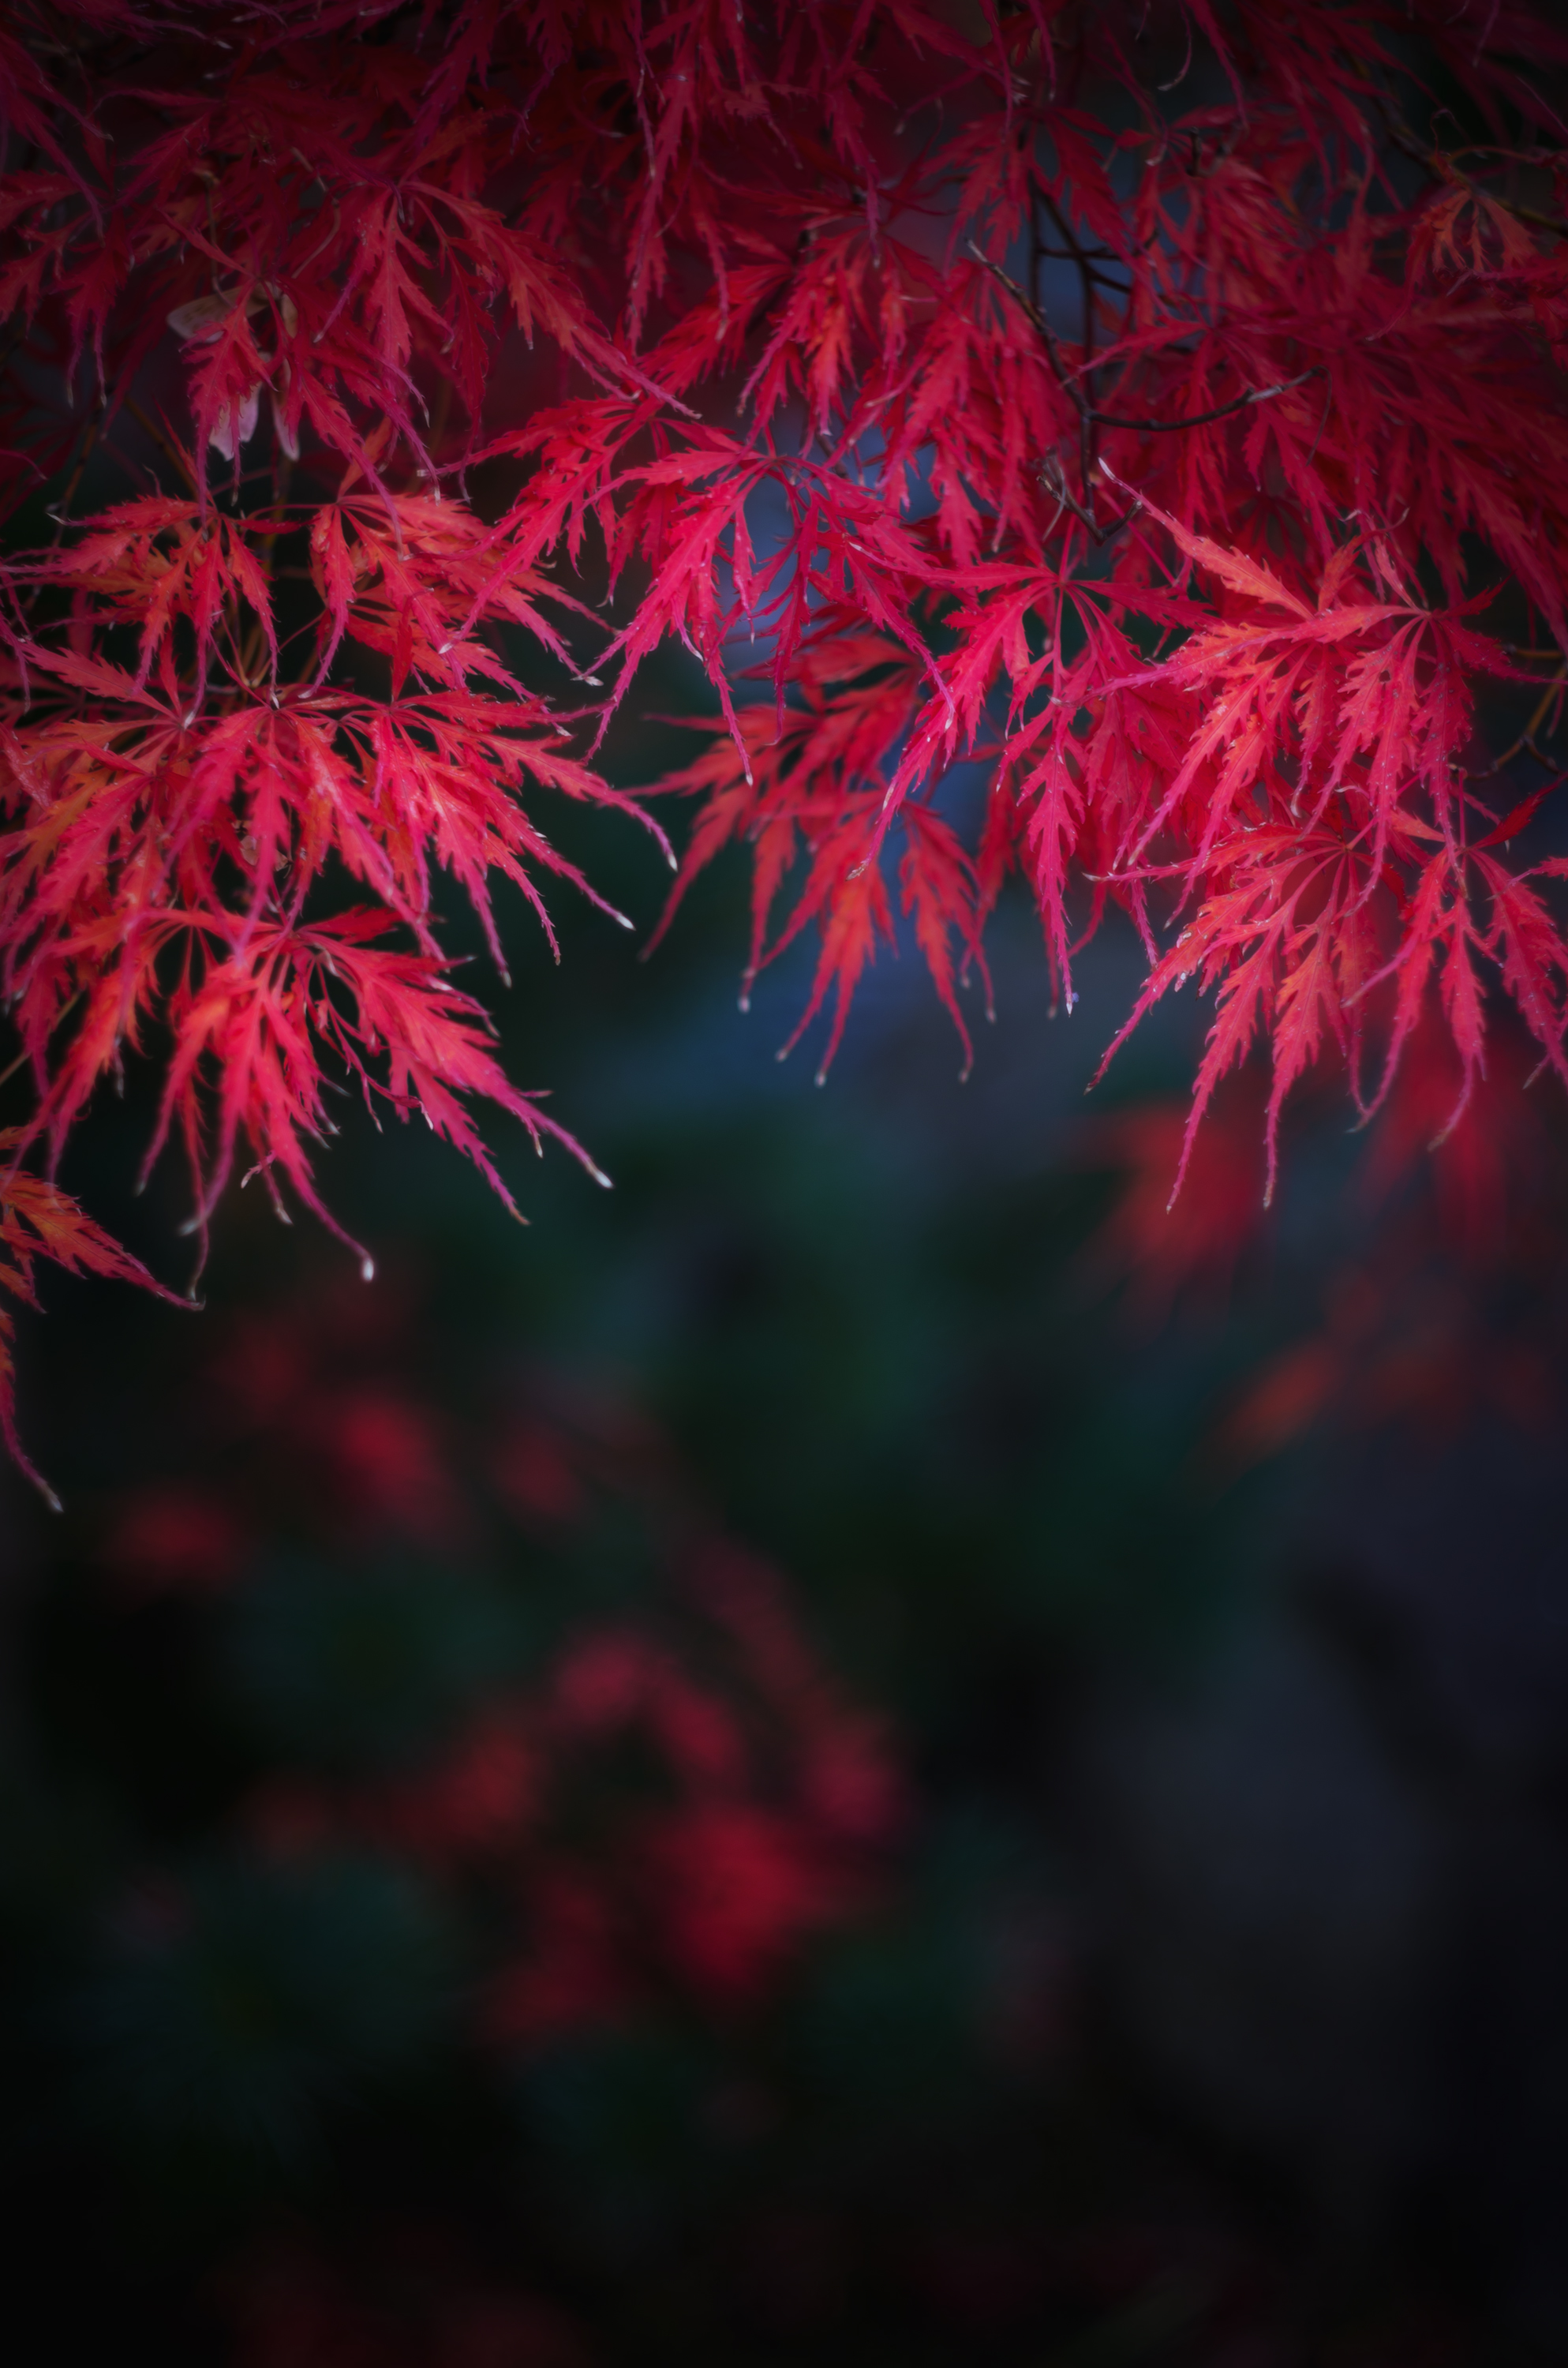 leaves, autumn, nature, red, branches High Definition image